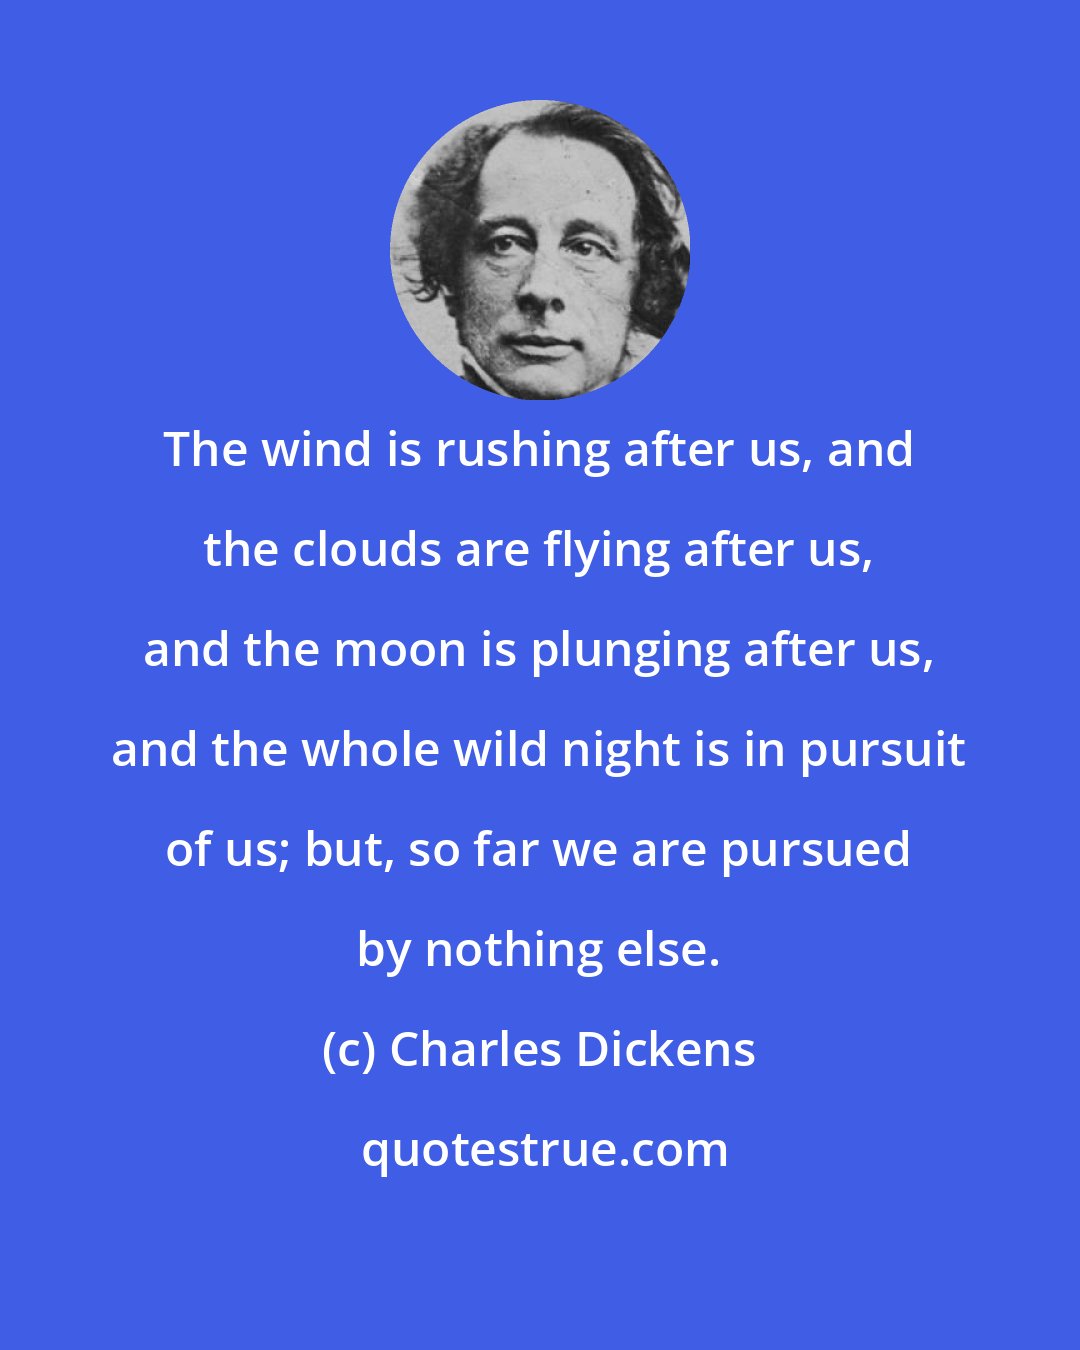 Charles Dickens: The wind is rushing after us, and the clouds are flying after us, and the moon is plunging after us, and the whole wild night is in pursuit of us; but, so far we are pursued by nothing else.